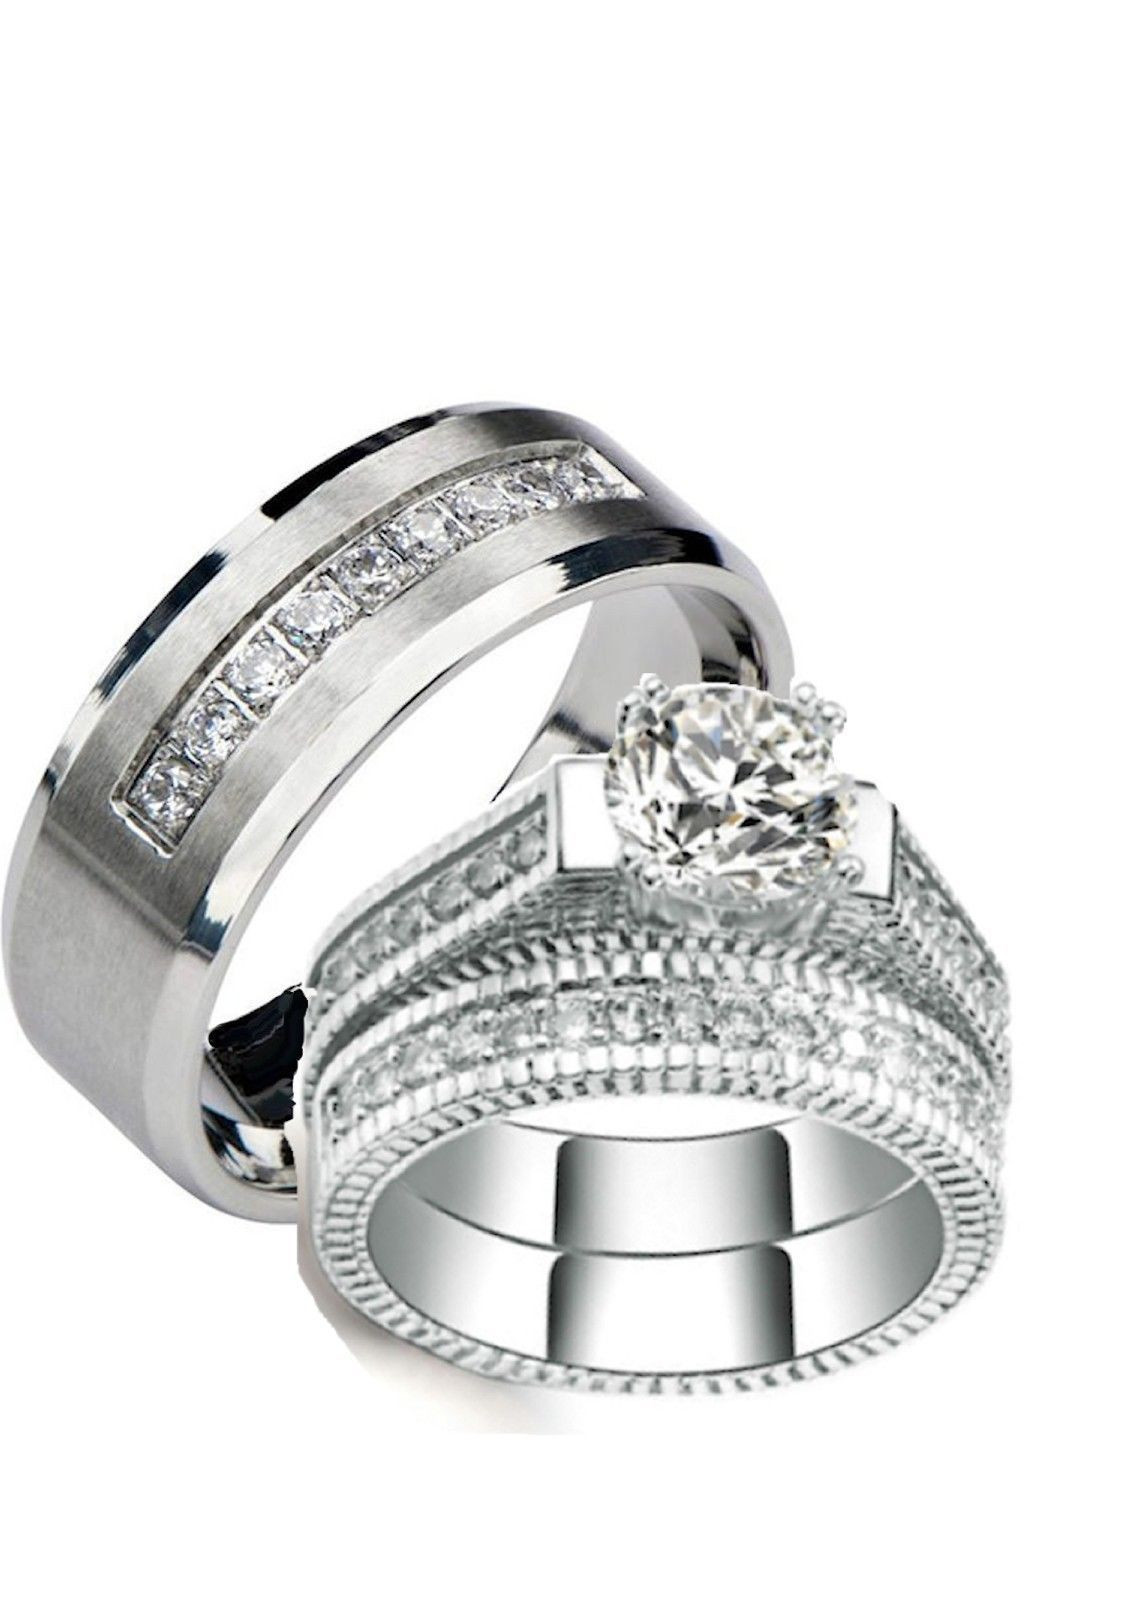 Wedding Rings Sets His And Hers For Cheap
 His and Hers Wedding Rings 3 Pc Sterling Silver